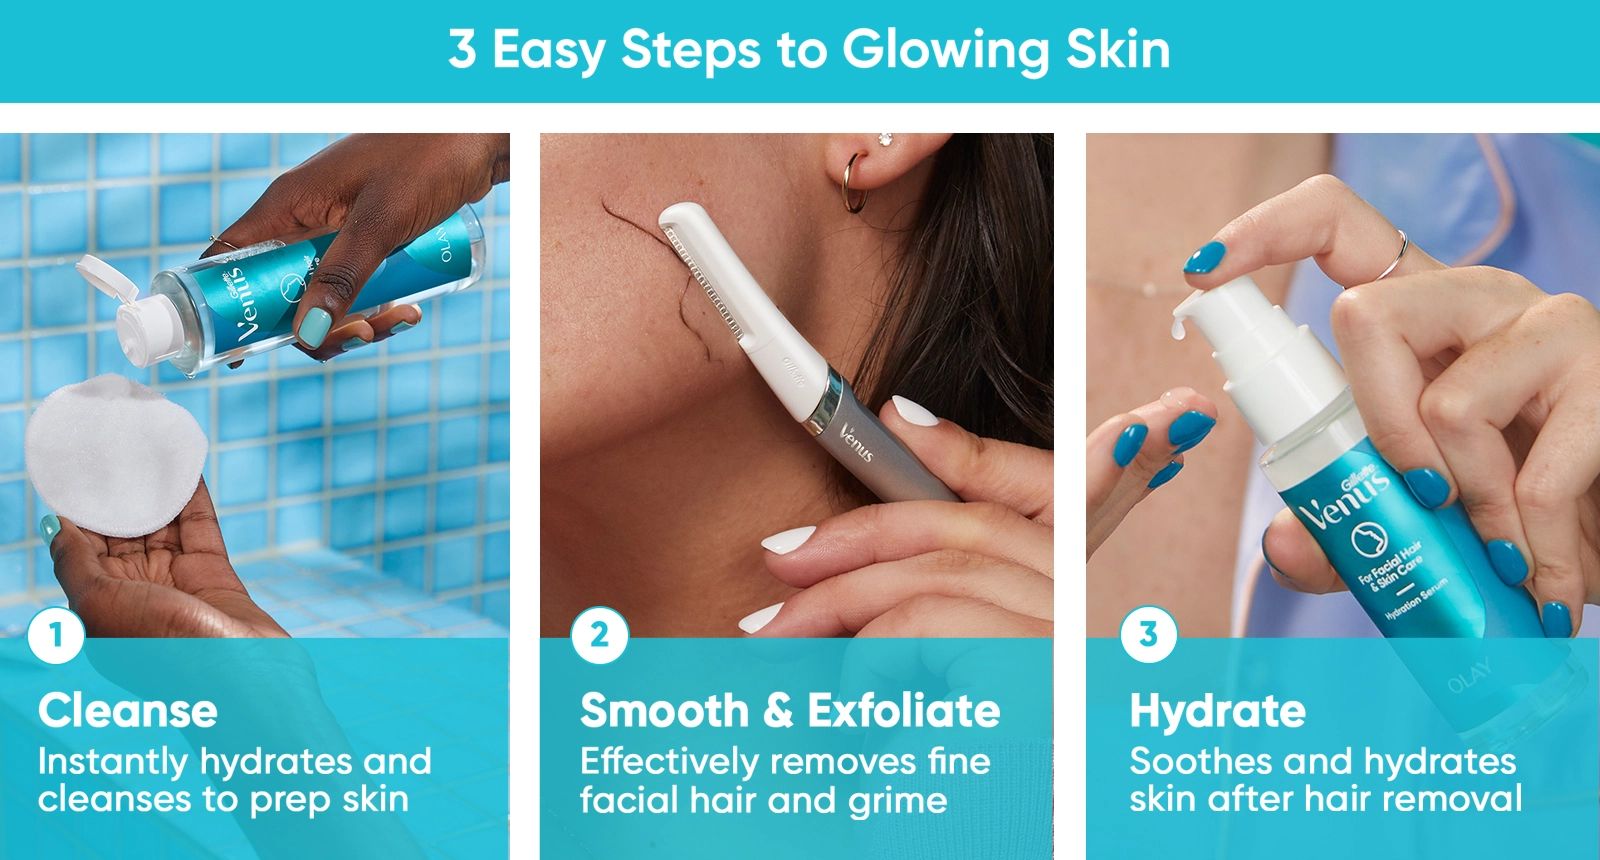 3 easy steps to glowing skin. 1, Cleanse, instantly hydrates and cleanses to prep skin. 2, Smooth and Exfoliate, effectively removes fine facial hair and grime. 3, Hydrate, soothes and hydrates skin after hair removal.